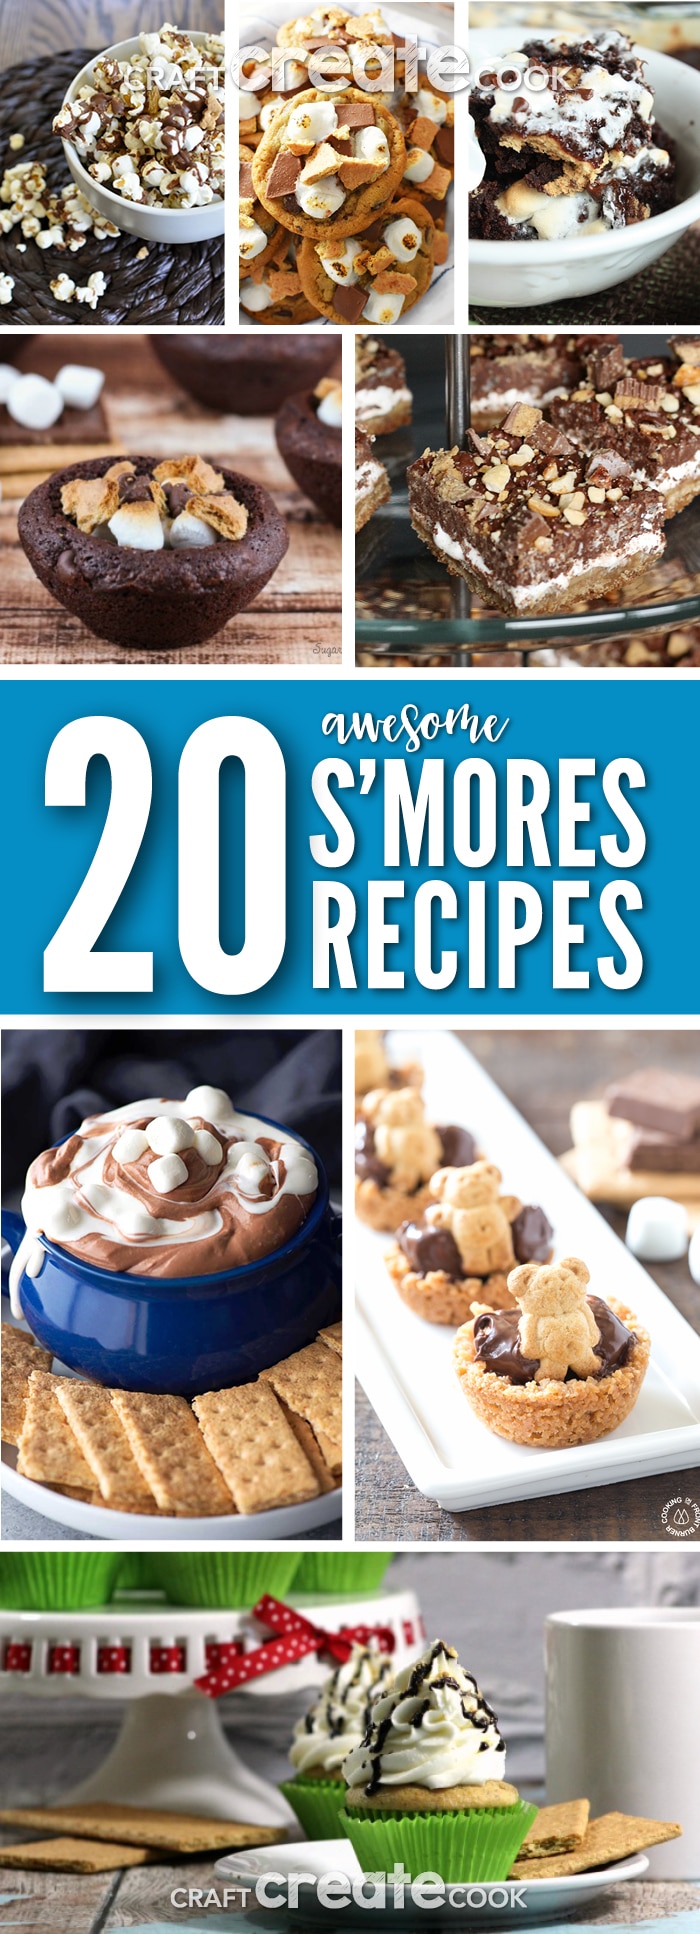 These 20 Awesome S'more Recipes are perfect for any time of year!